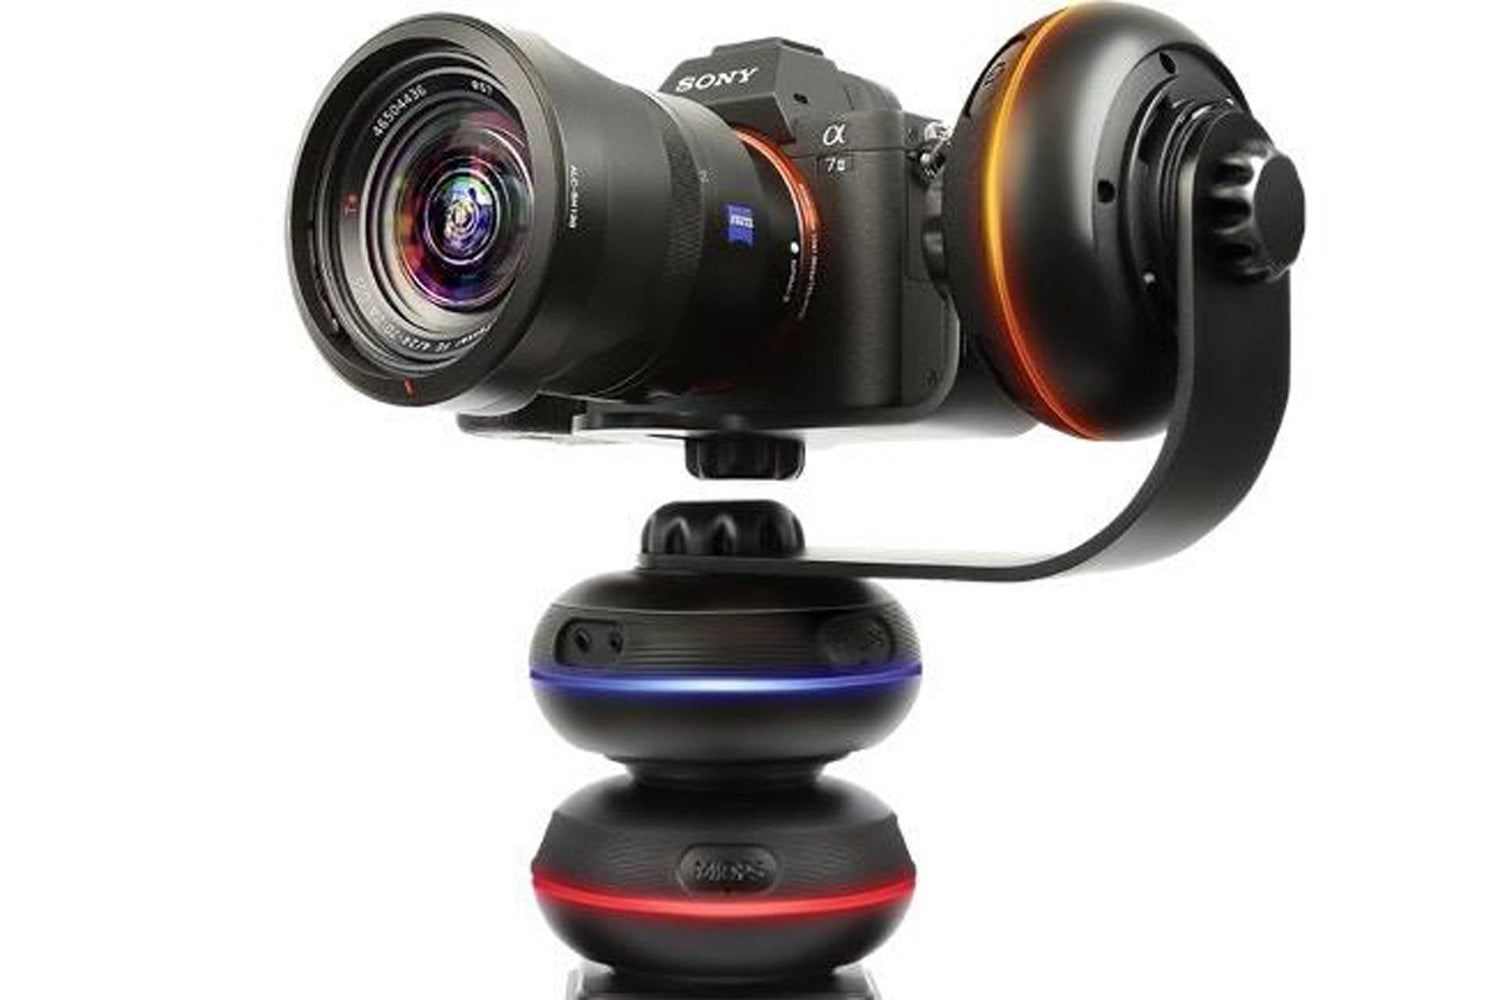 Capsule360 is the Ideal Independent Filmmaker’s Companion